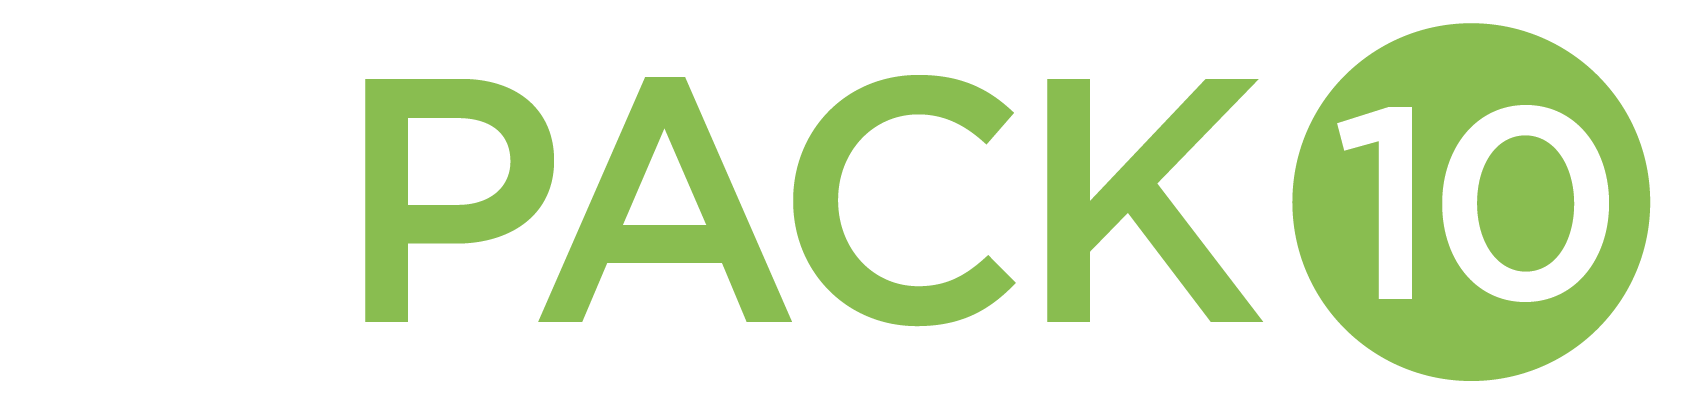 The image shows the text "PACK" in large, green, uppercase letters. Next to it is a green circle with the number "10" inside it, also in white. The background is white.